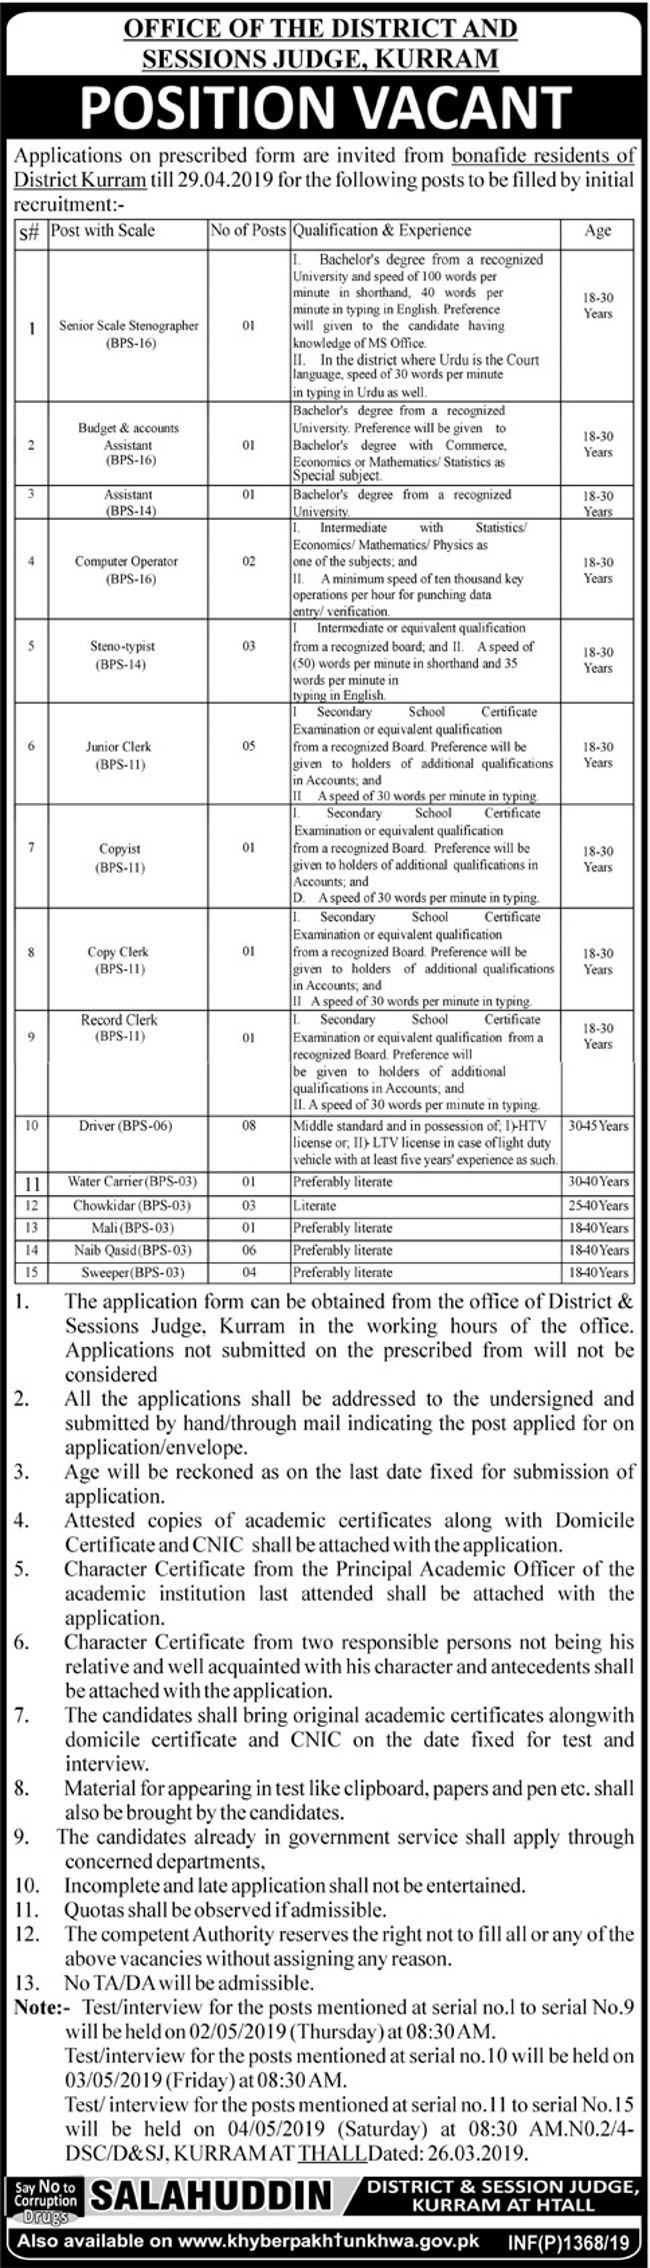 District & Session Judge Kurram Jobs 2019 for 39+ Clerks, Accounts, Stenographers, Stenotypists, Computer Operator & Other Posts